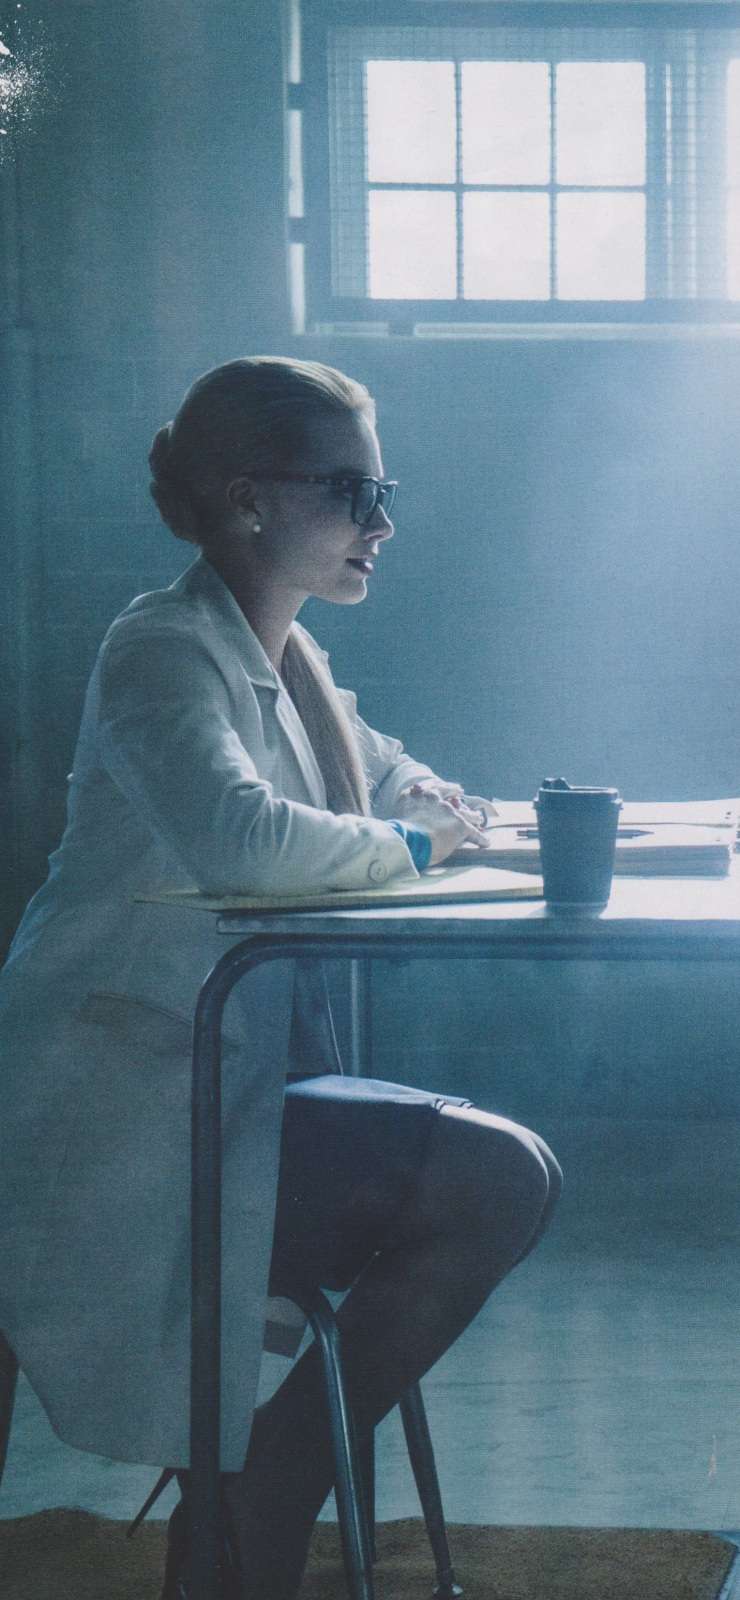 New images of The Joker in Suicide Squad revealed! X3626h10